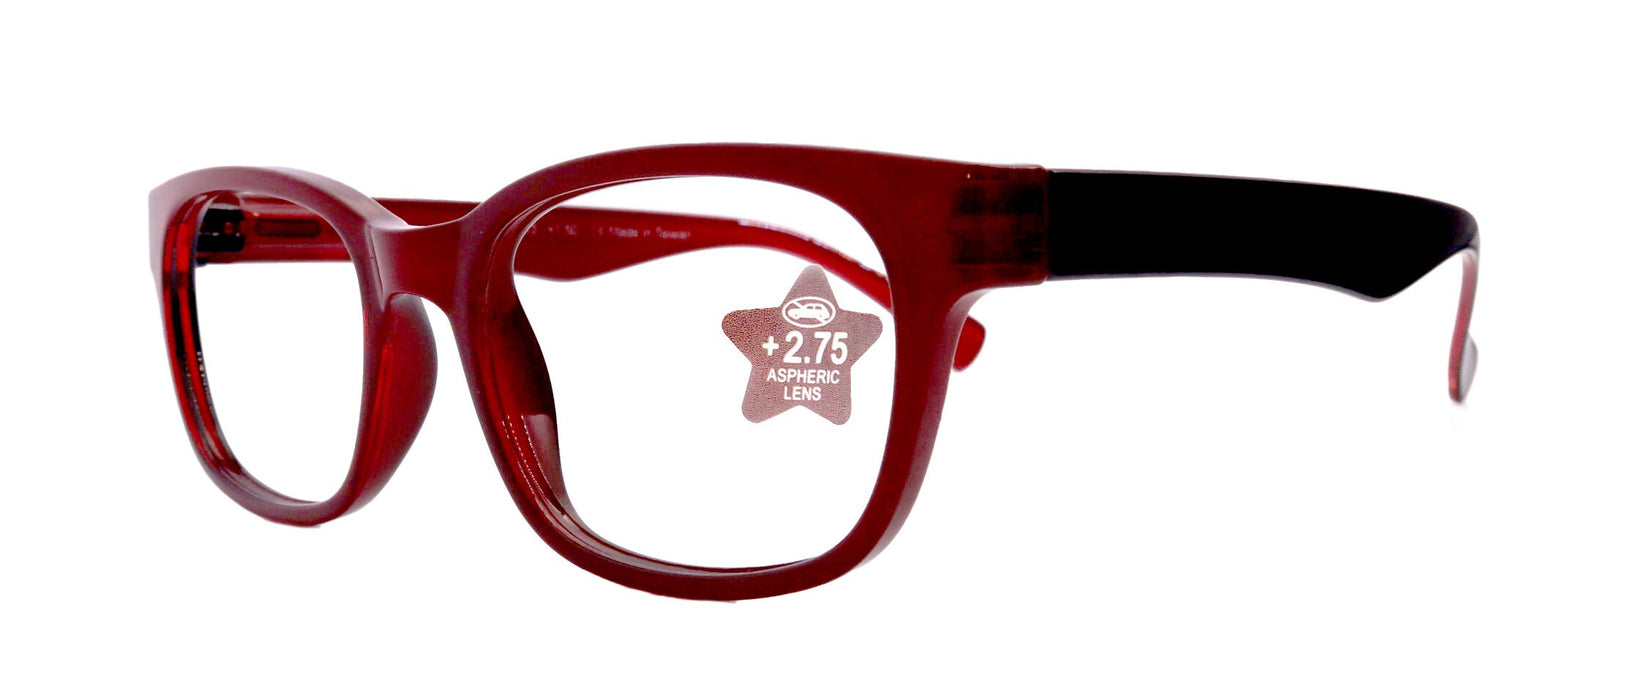 Rita, Premium Reading Glasses High End Reading Glass +1.50 to +6 Magnifying Eyeglasses (Square) (Red) optical Frames